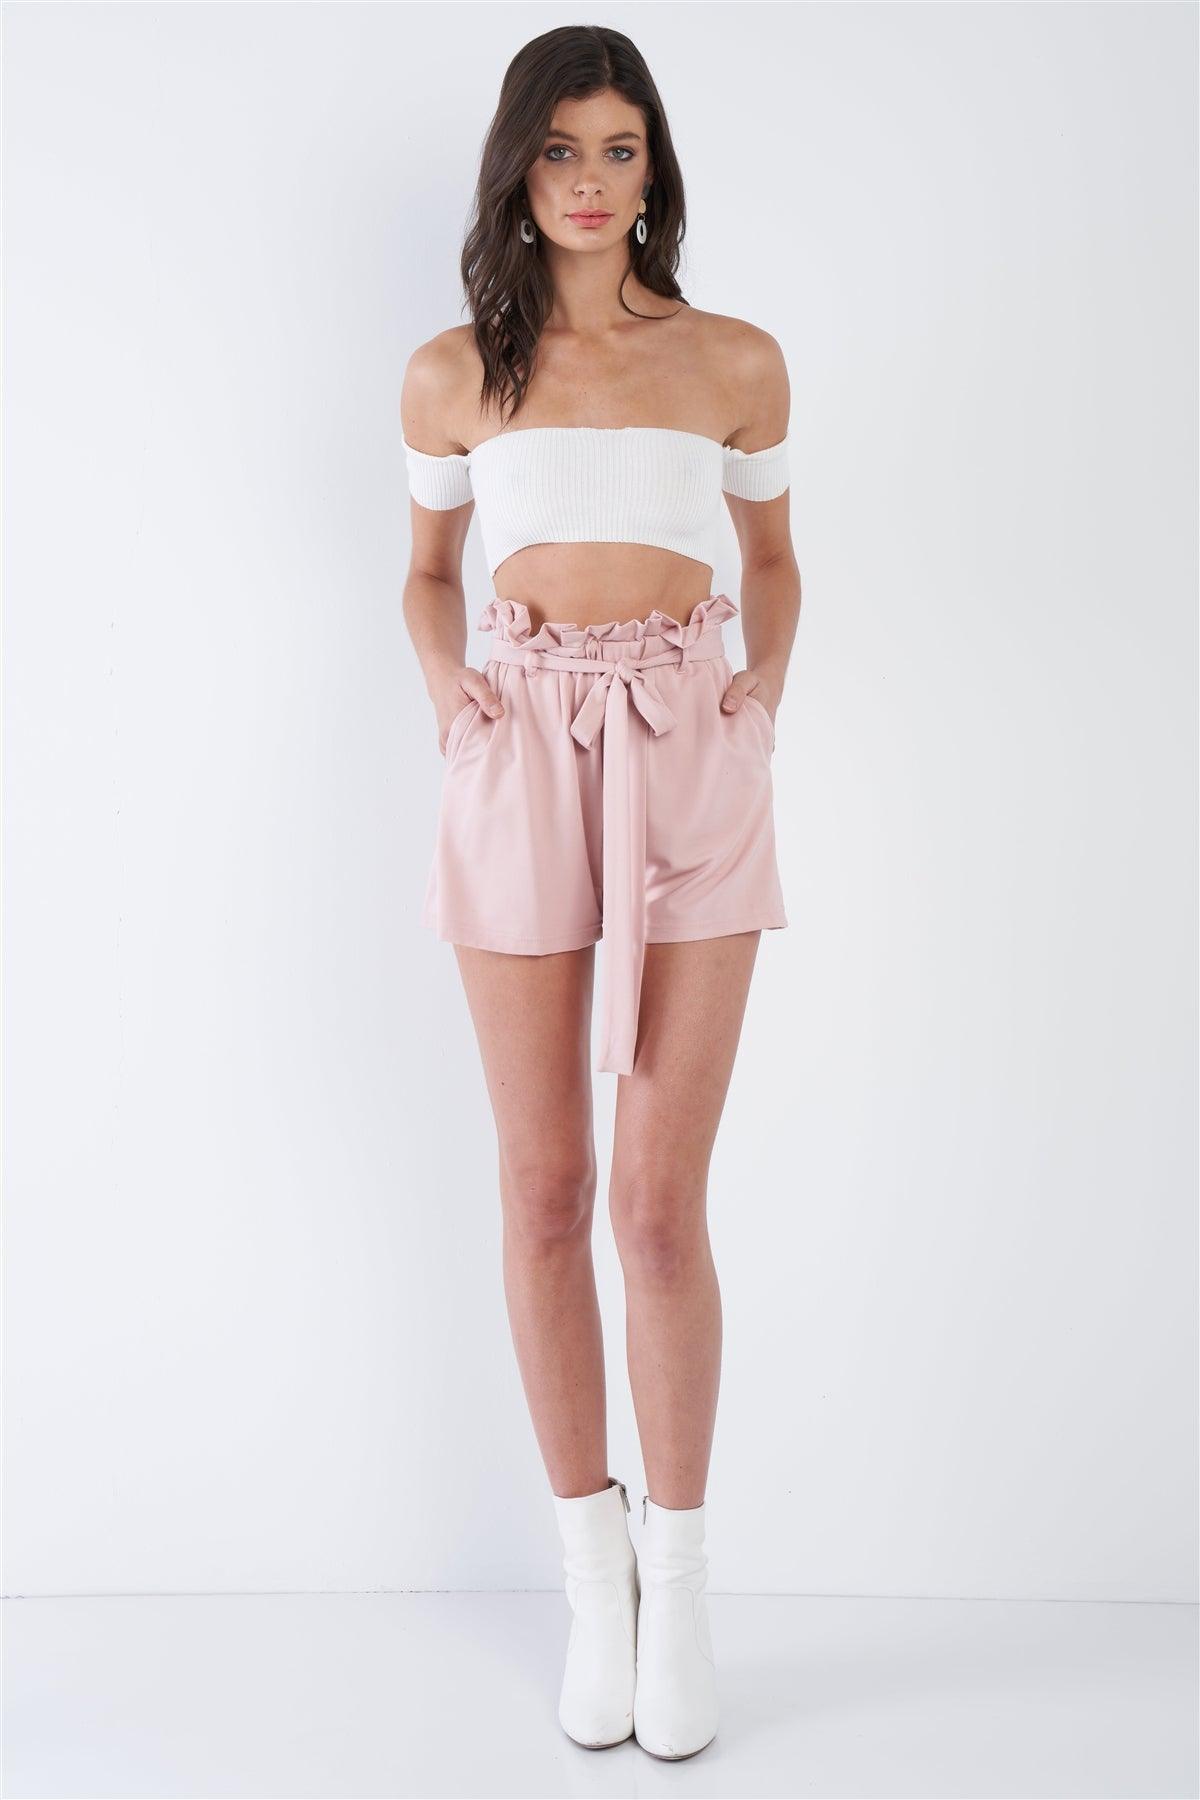 Pink High Waist Frill Trim Casual Office Chic Shorts  /4-2-1